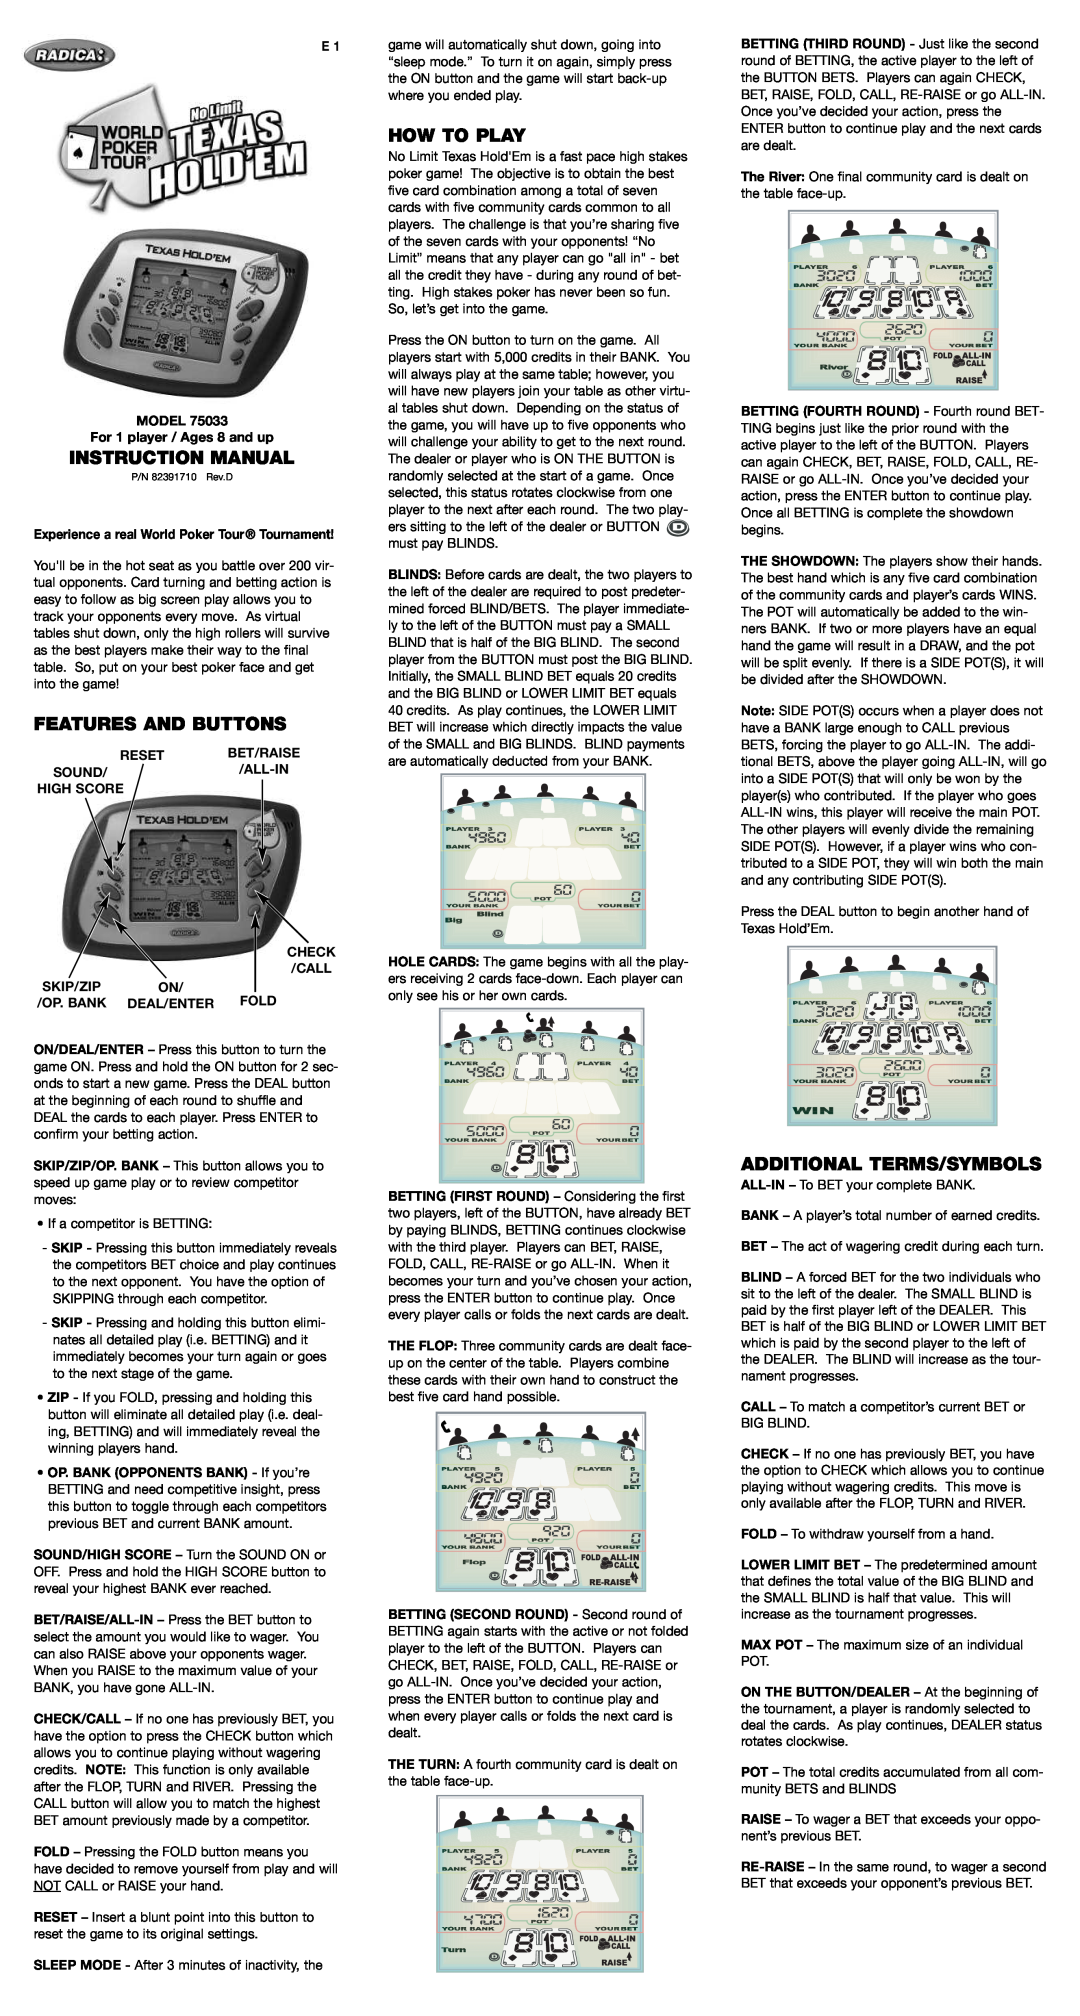 Radica Games 75033 instruction manual Instruction Manual, Features And Buttons, How To Play, Additional Terms/Symbols 